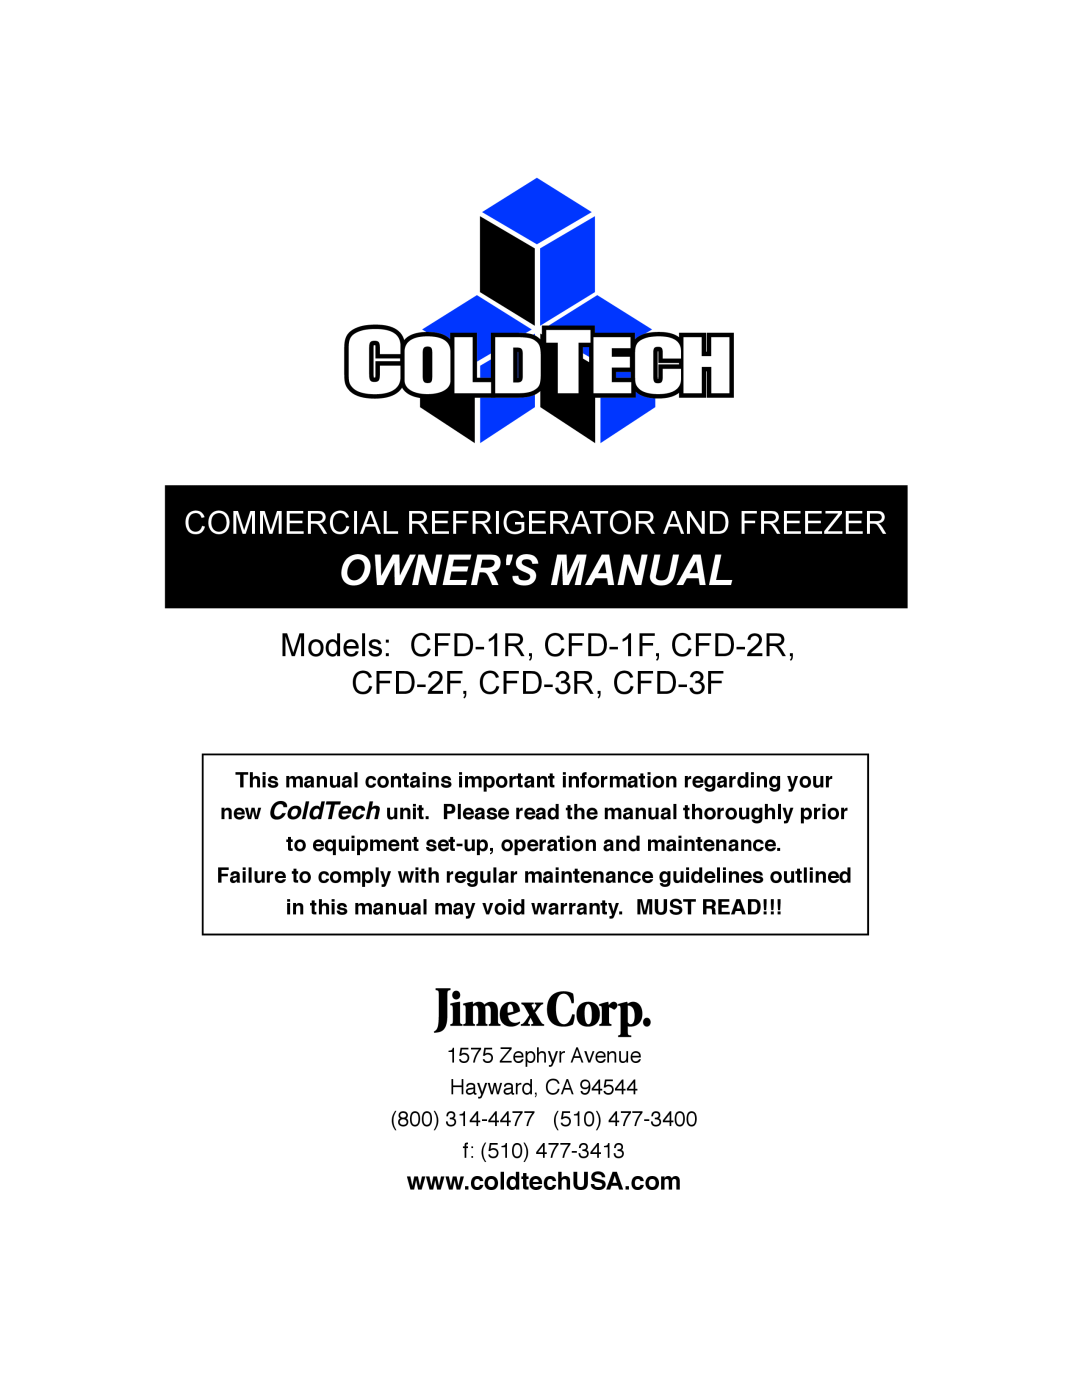 ColdTech owner manual Models CFD-1R, CFD-1F, CFD-2R, CFD-2F, CFD-3R, CFD-3F, Commercial Refrigerator And Freezer 